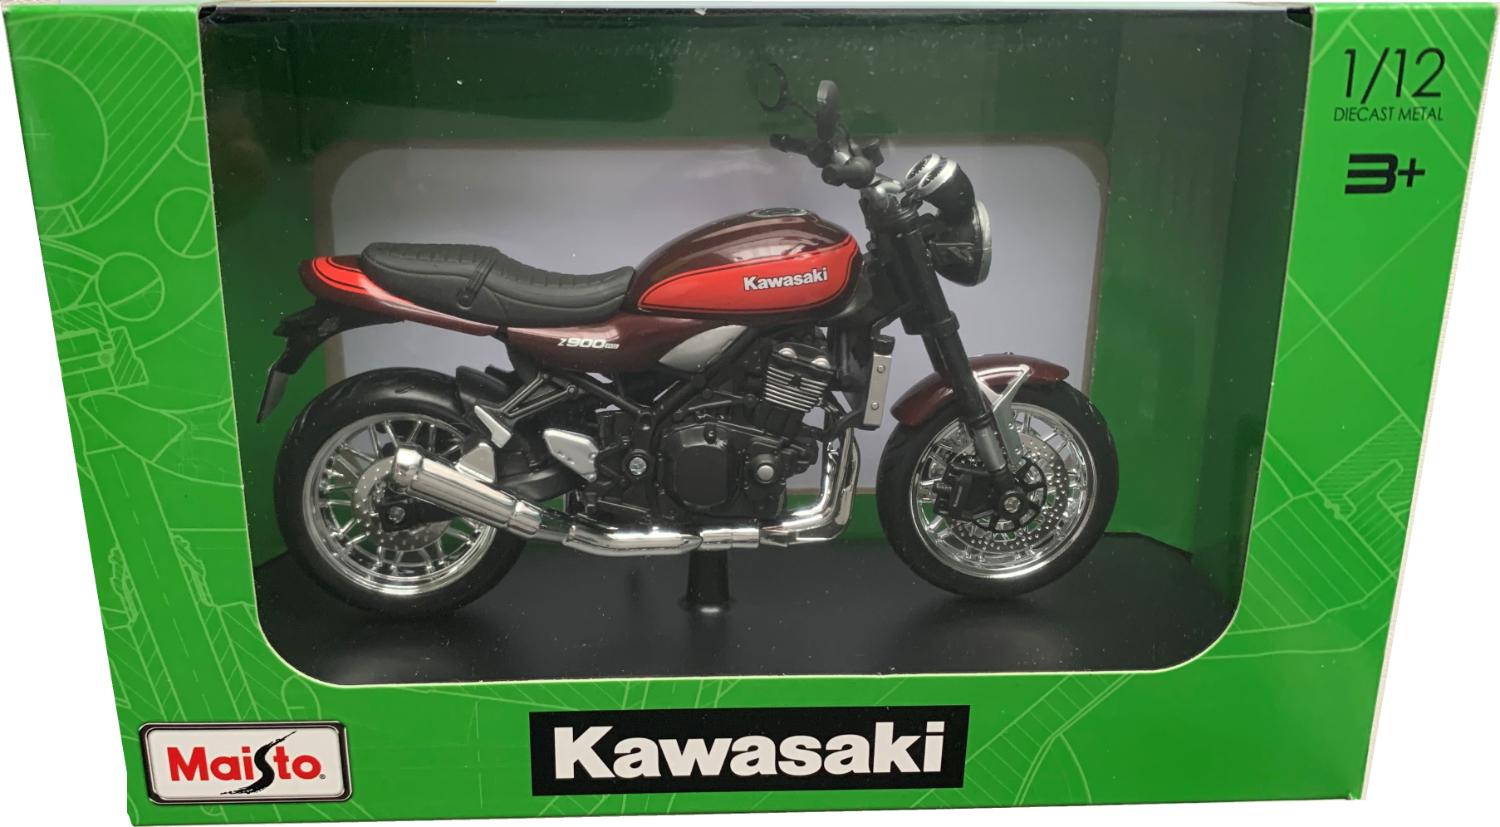 Kawasaki Z900RS in brown / red 1:12 scale model from Maisto,  mounted on  a plinth, presented in a green Kawasaki themed box.